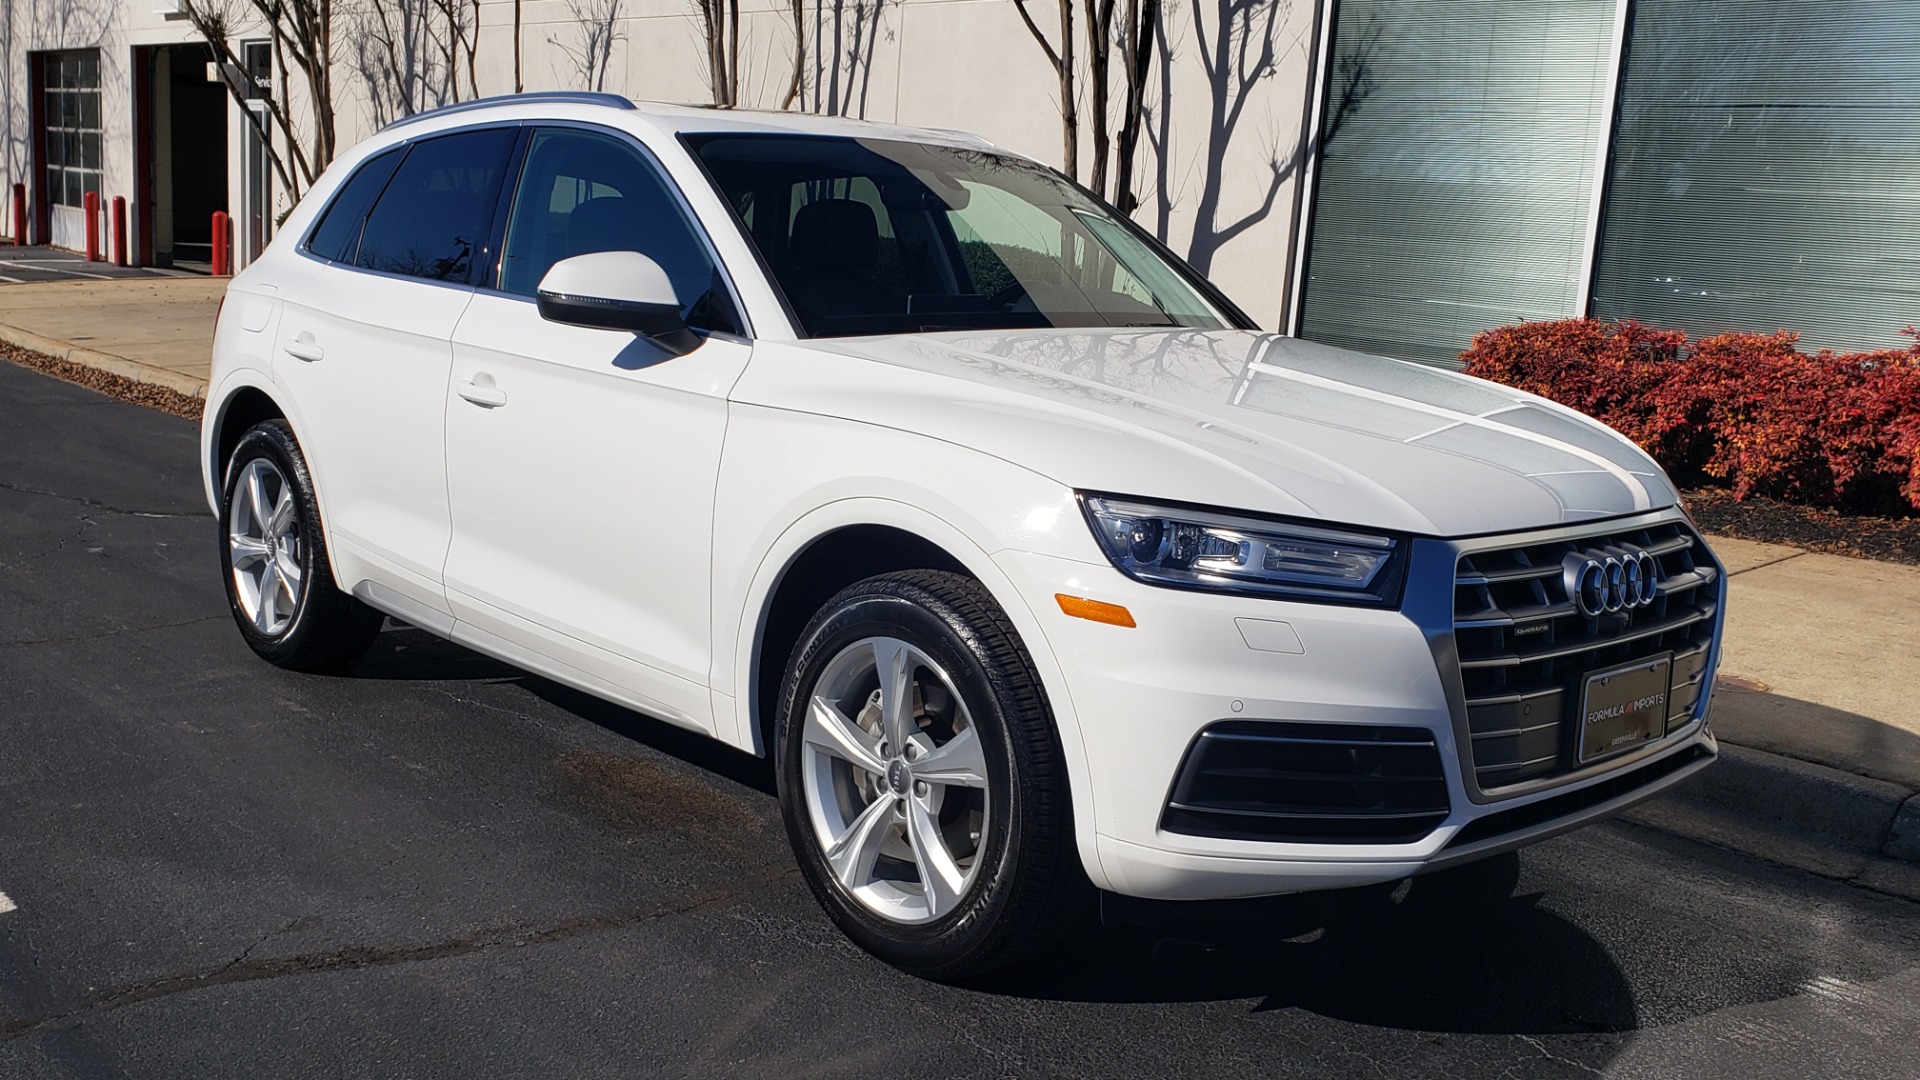 Used 2019 Audi Q5 PREMIUM PLUS 2.0L / AWD / NAV / PANO-ROOF / DRVR ASST / REARVIEW for sale $42,395 at Formula Imports in Charlotte NC 28227 5